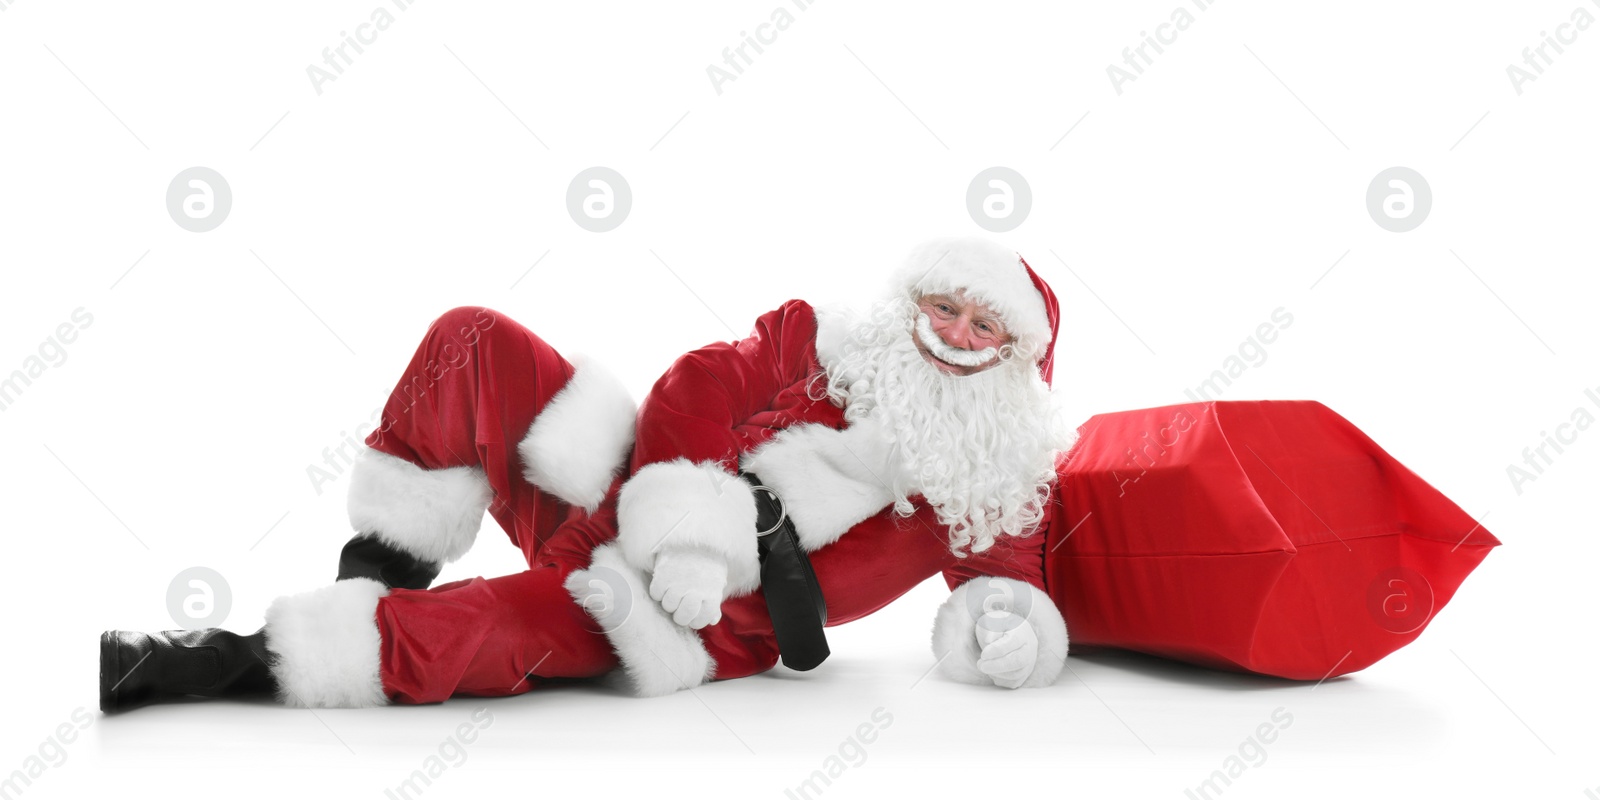 Photo of Authentic Santa Claus with big red bag full of gifts lying on white background